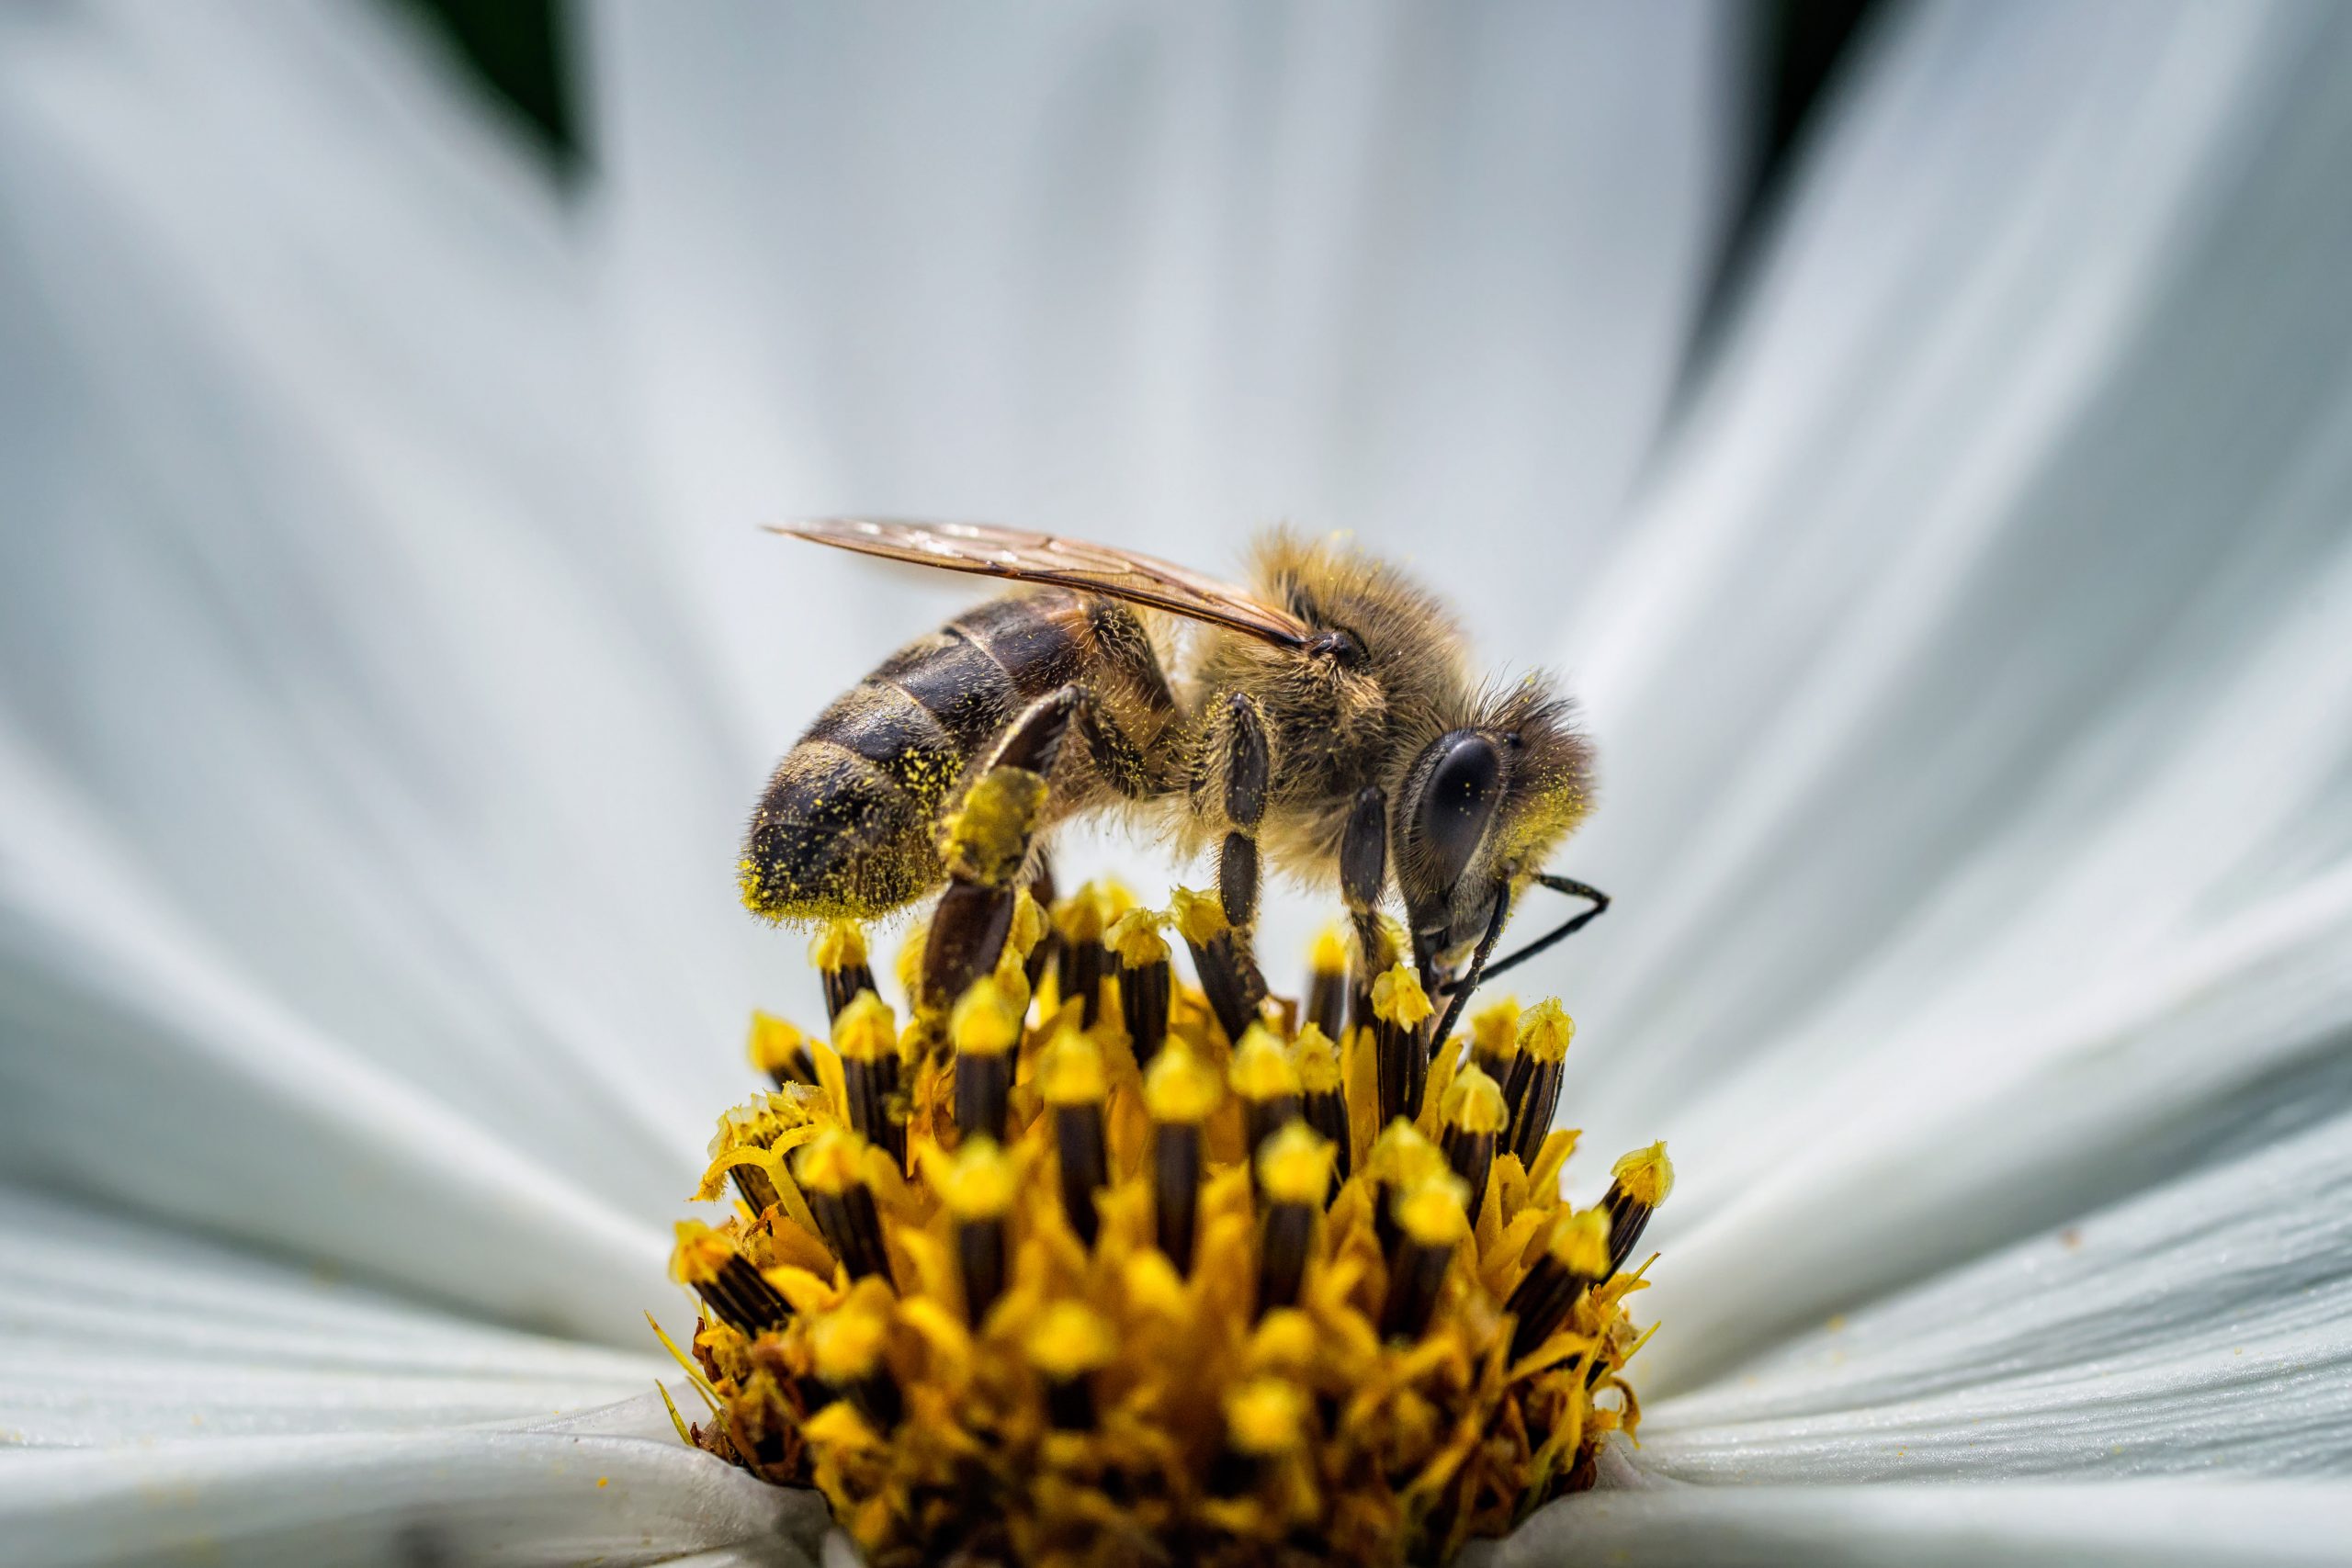 Bee on the pollen of a white flower.